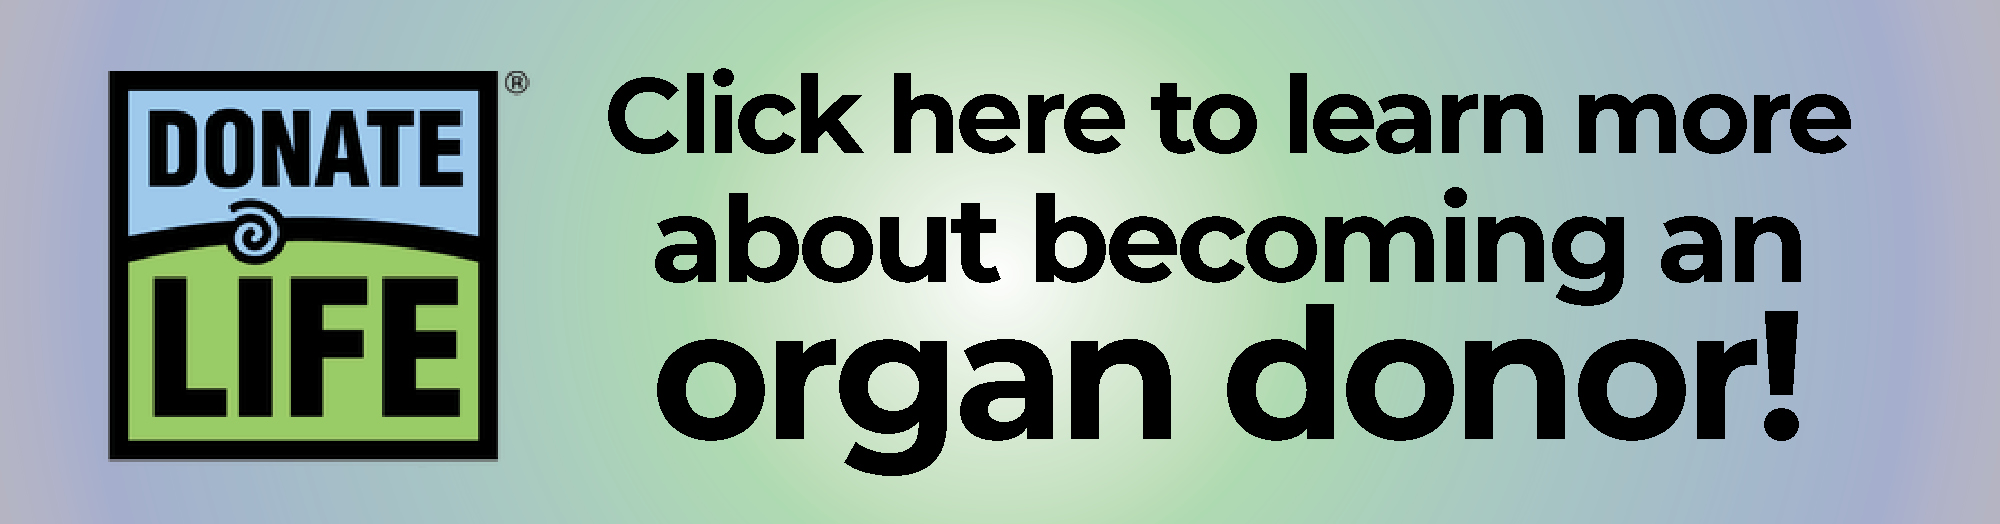 Donate Life.  Become an Organ Donor